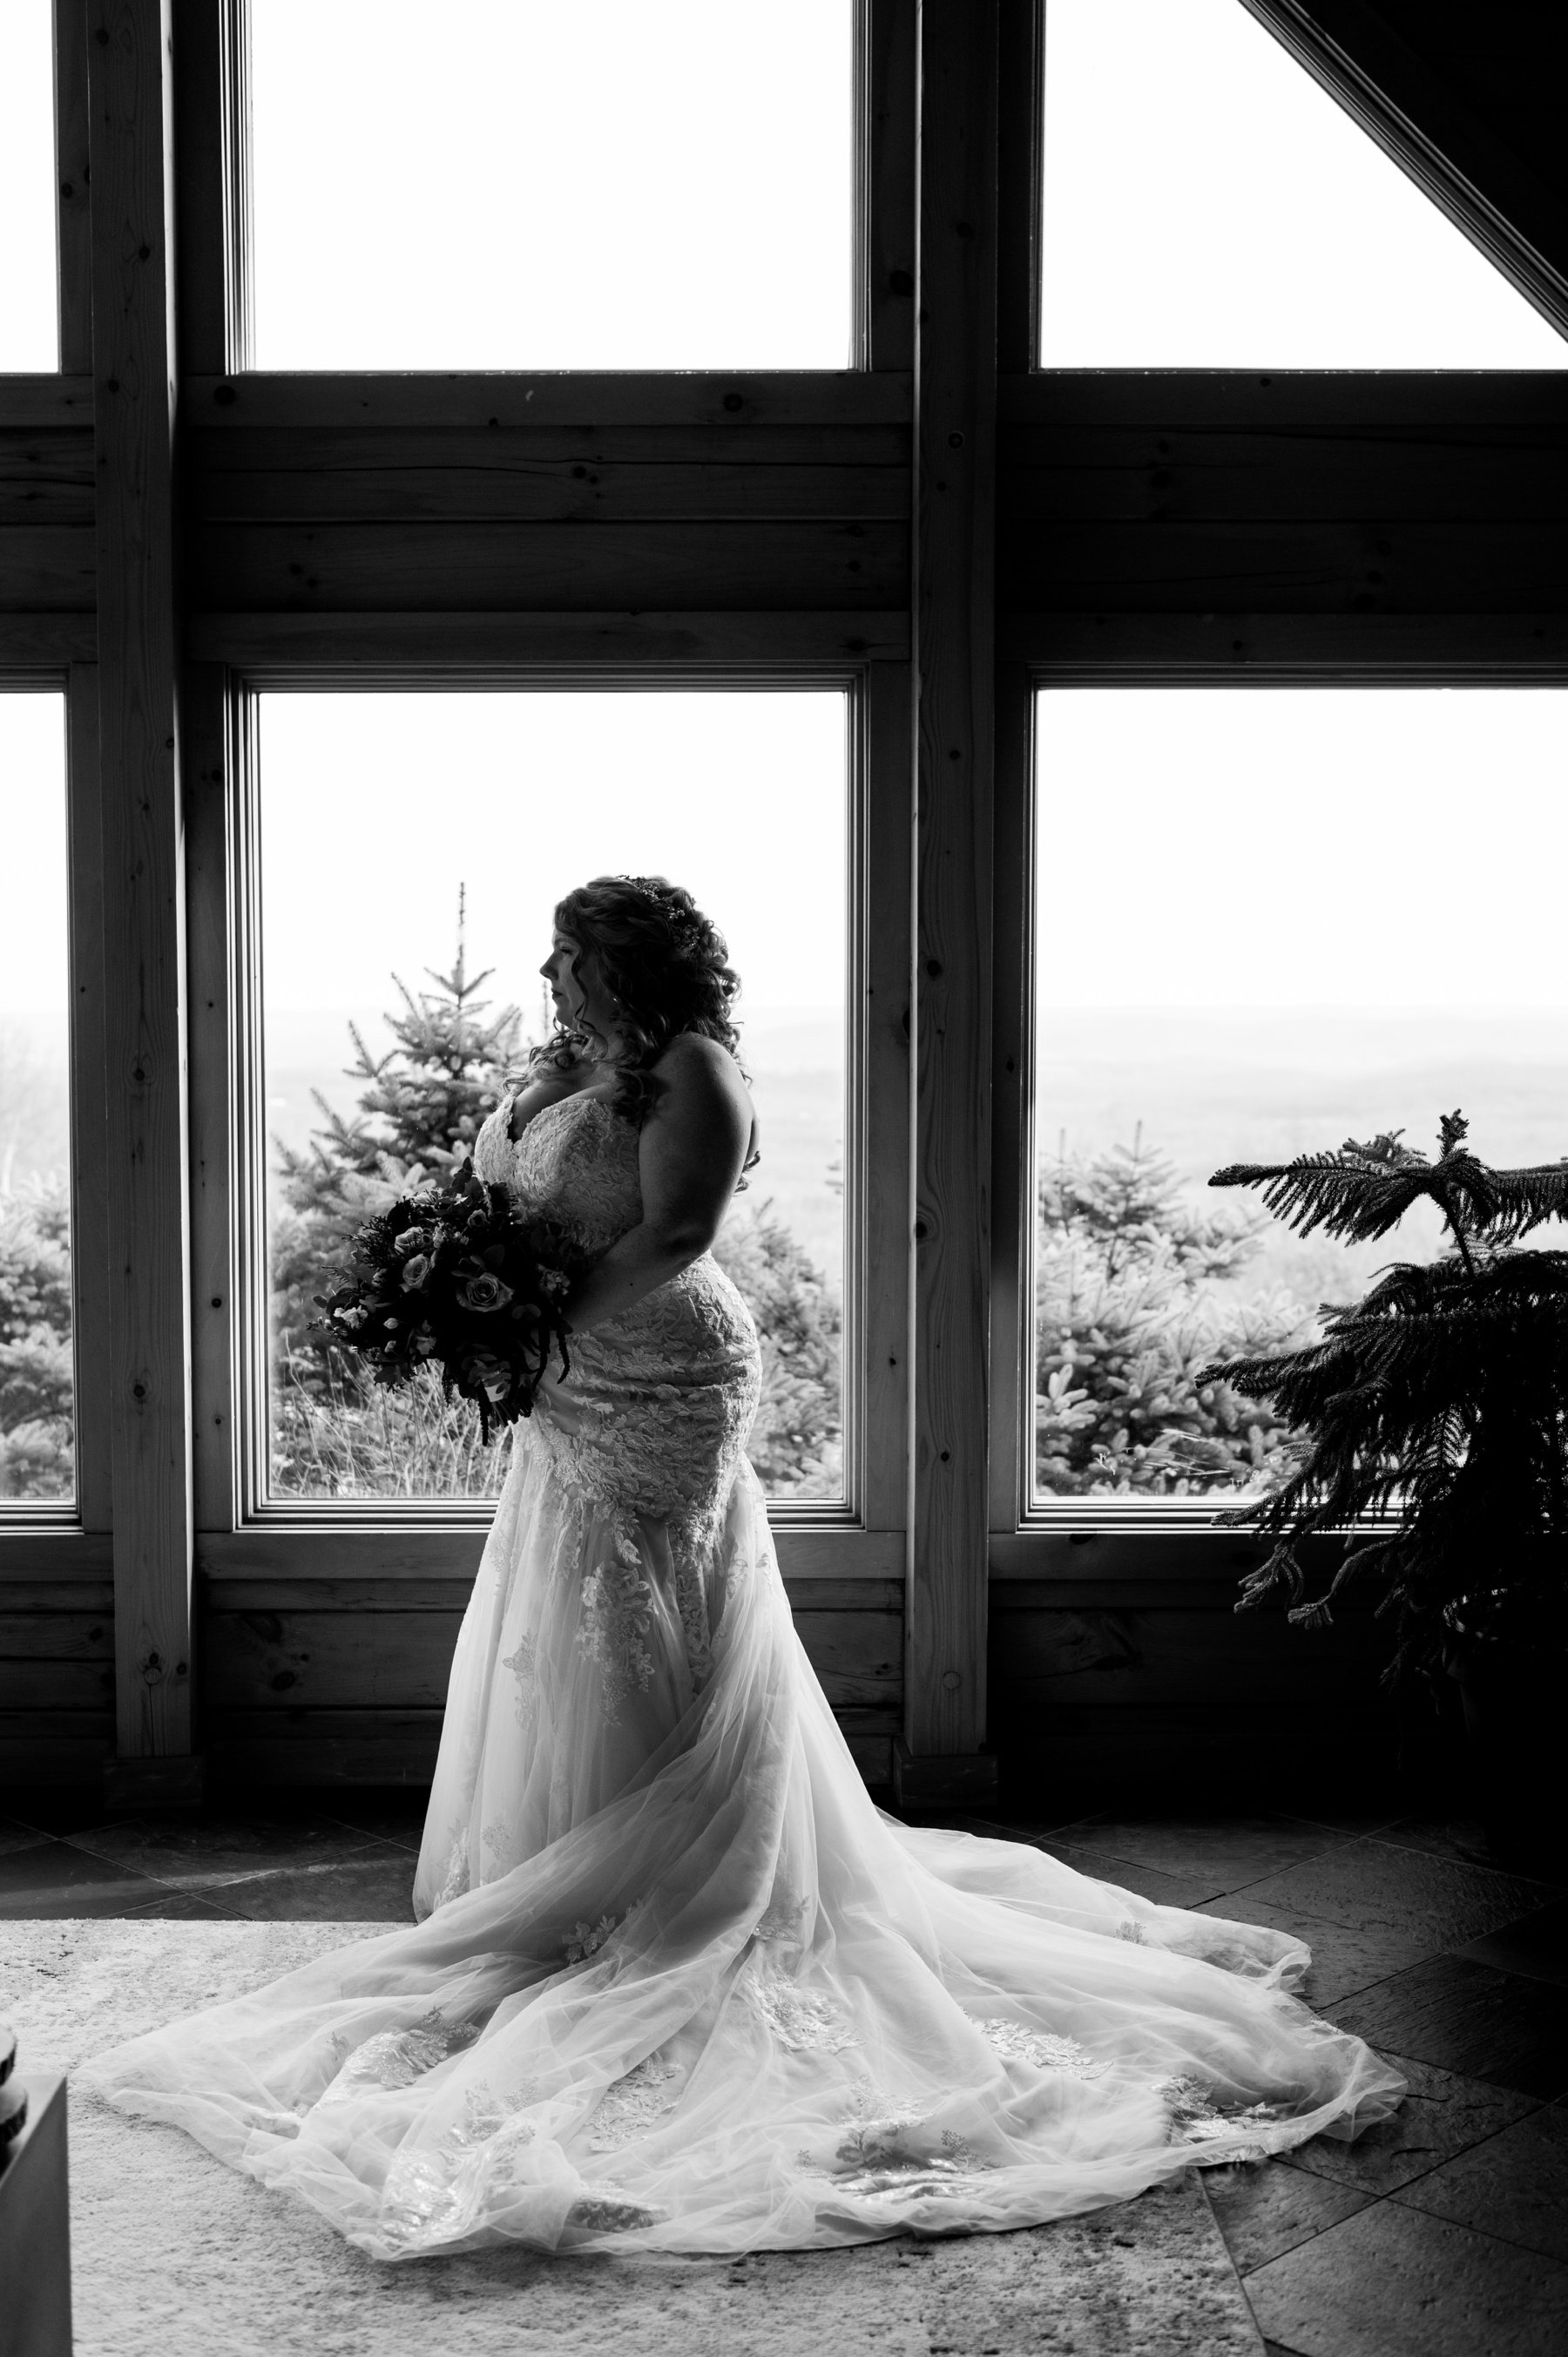 Black and white portrait of a bride standing in front of a window